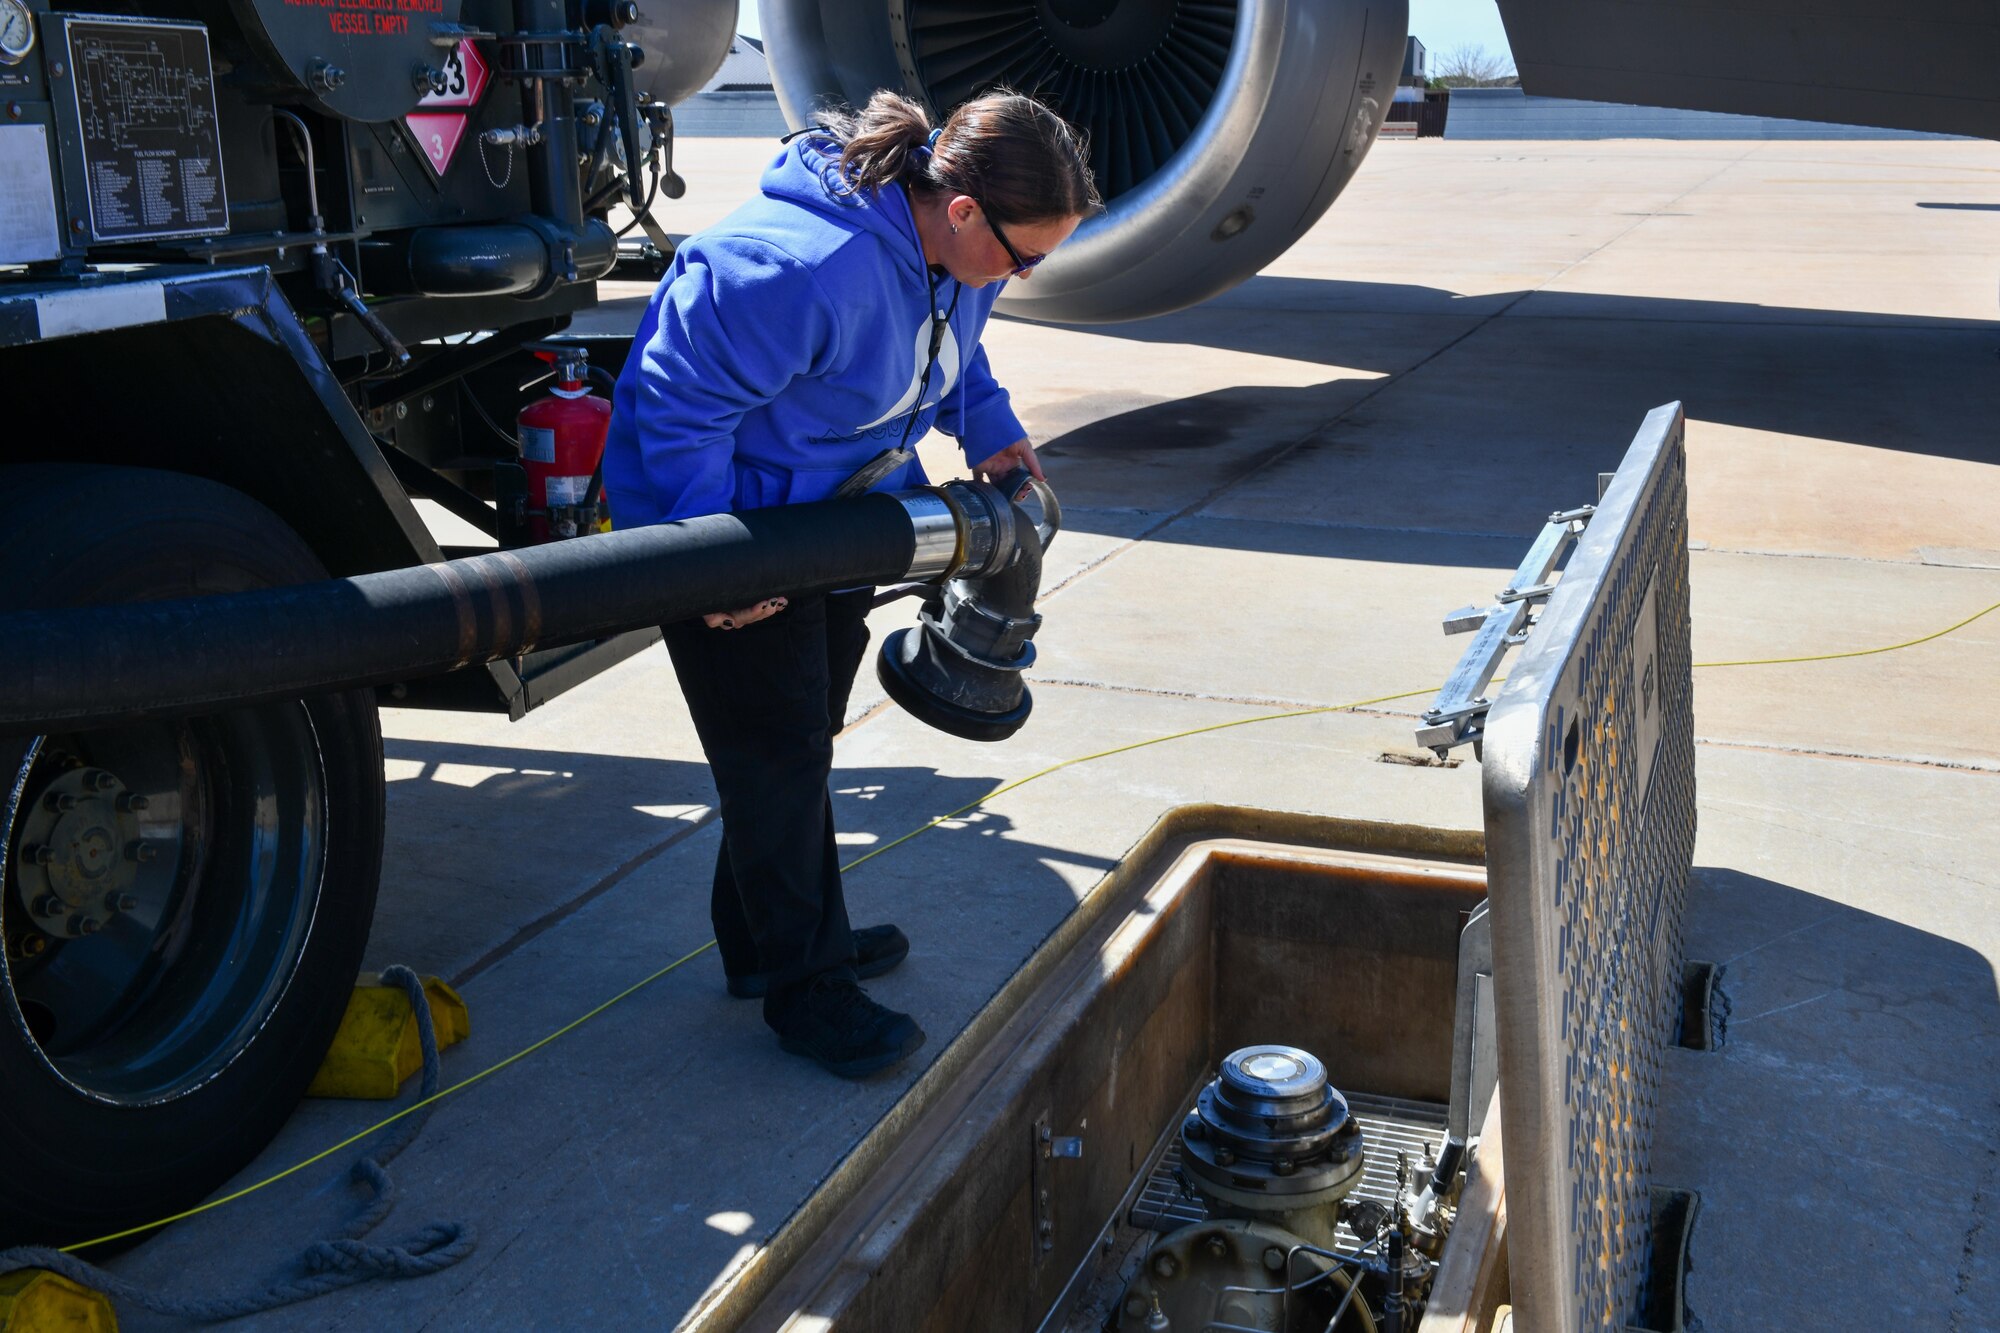 Theresa Baugher, 97th Logistics Readiness Squadron fuel systems operator, attaches a fuel line at Altus Air Force Base (AFB), Oklahoma, March 28, 2023. Altus AFB’s fuels management flight oversees the distribution of more than 40 million gallons of fuel annually. (U.S. Air Force photo by Airman 1st Class Miyah Gray)